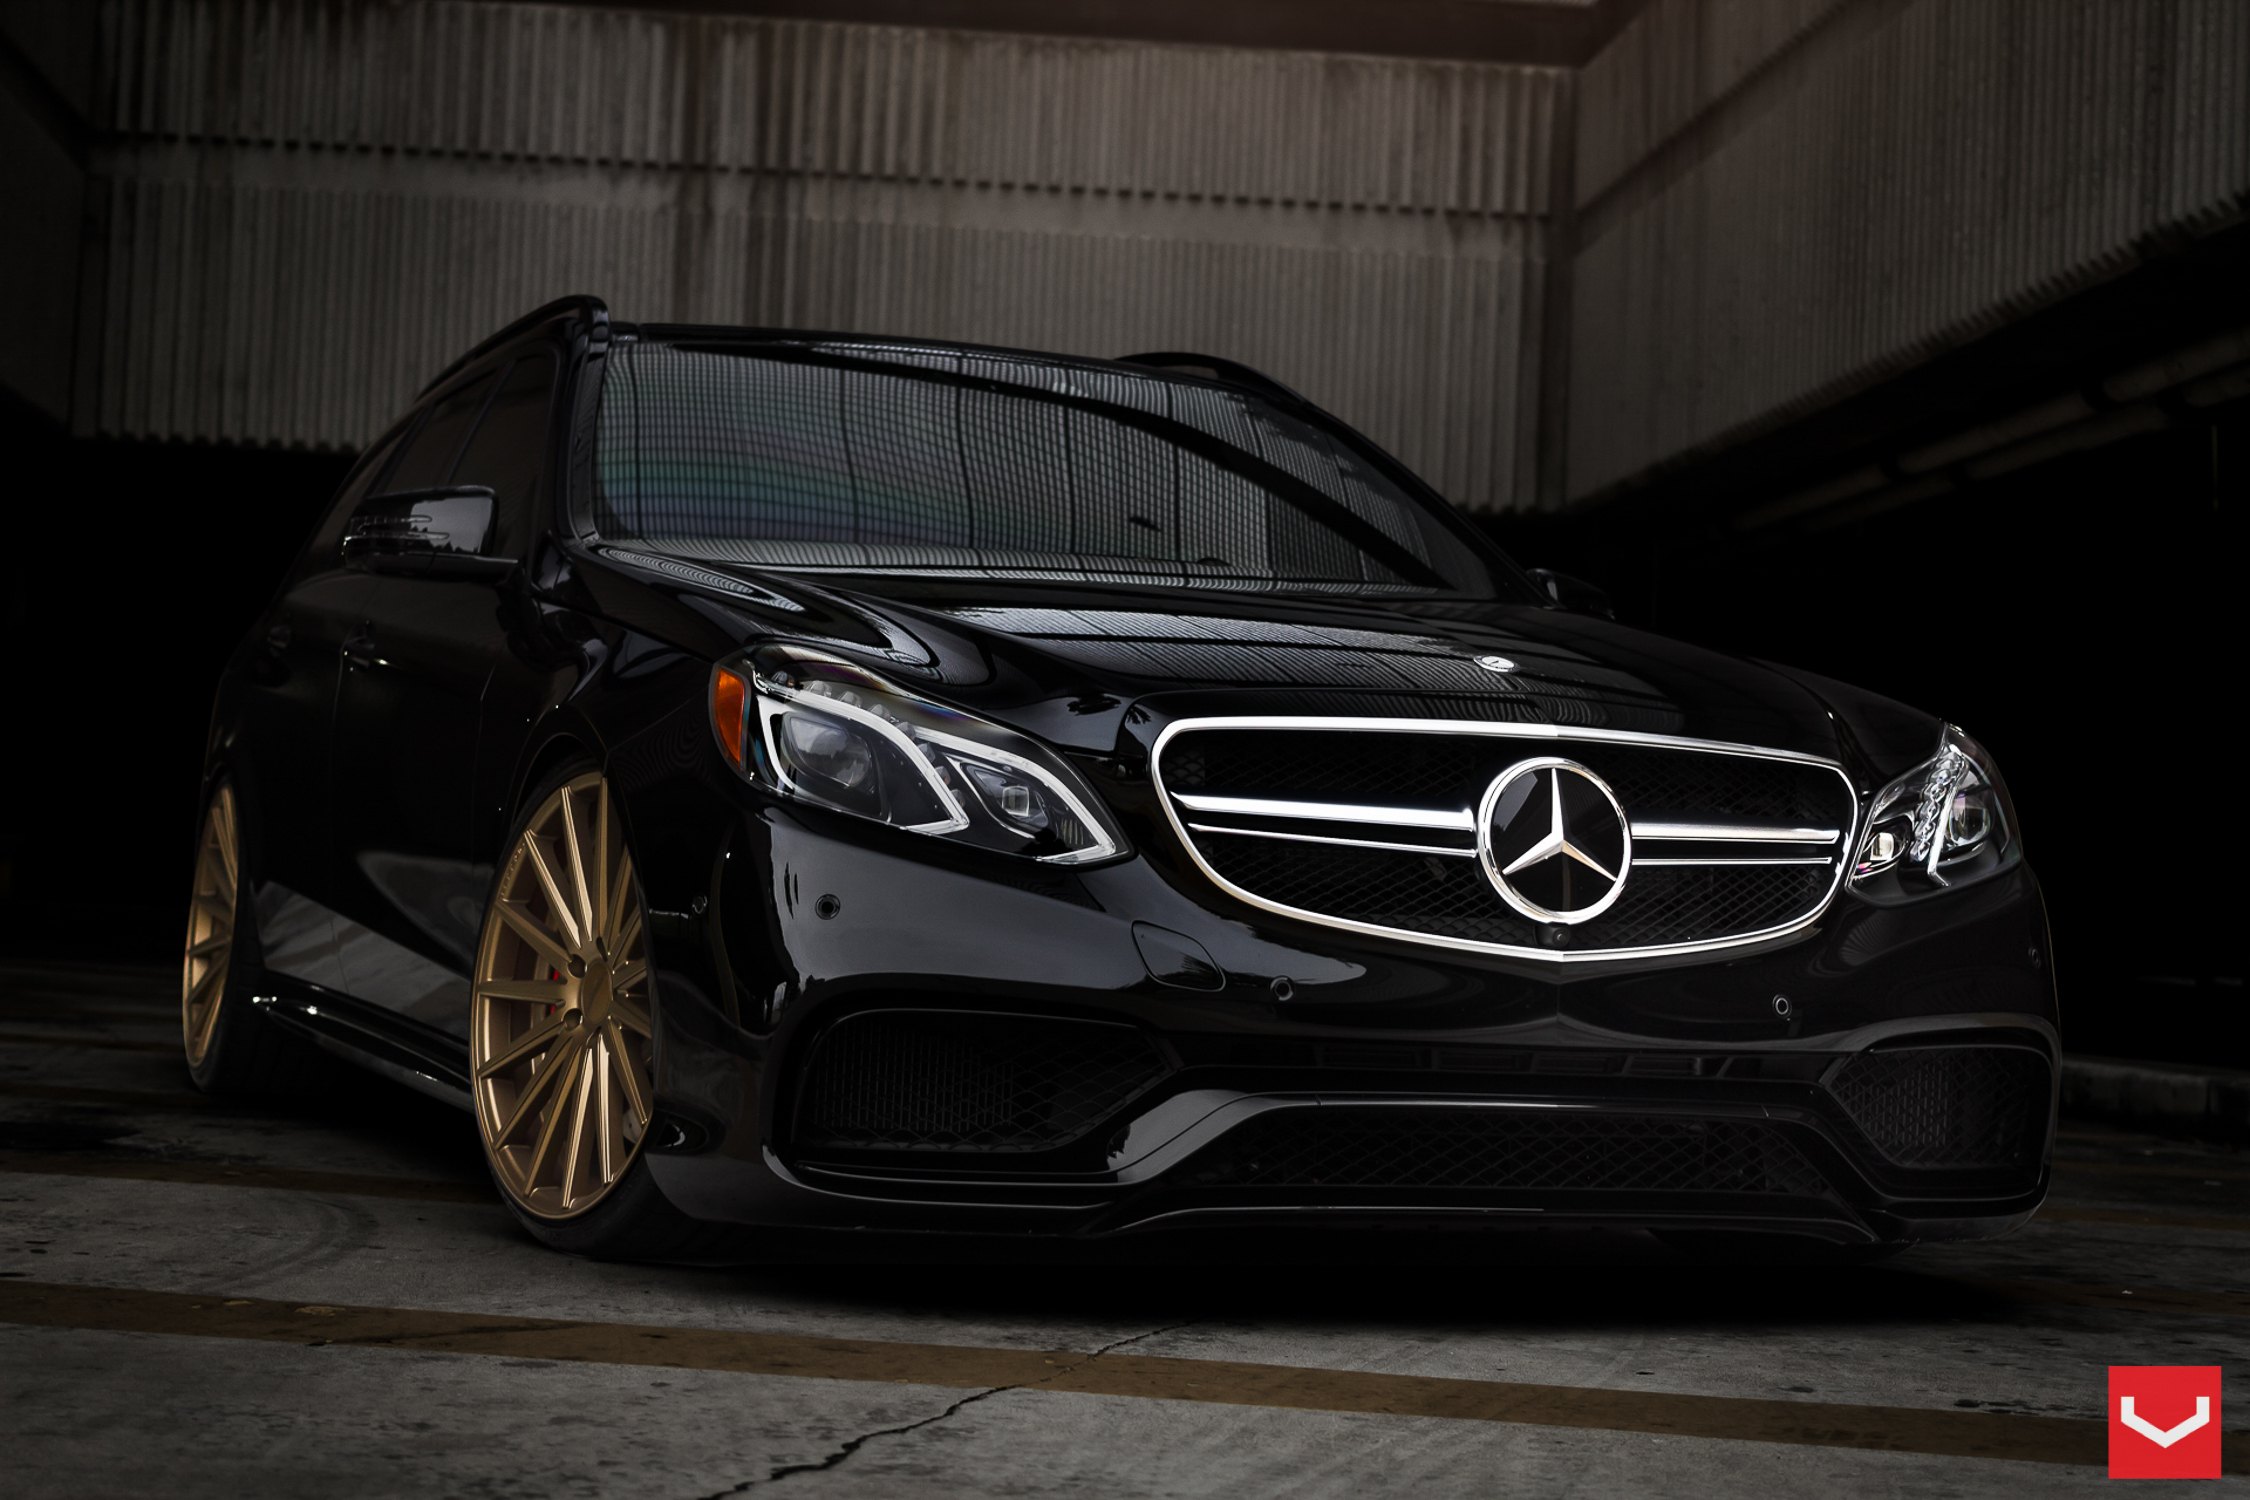 LED-bar Style Headlights on Black Mercedes E Class - Photo by Vossen